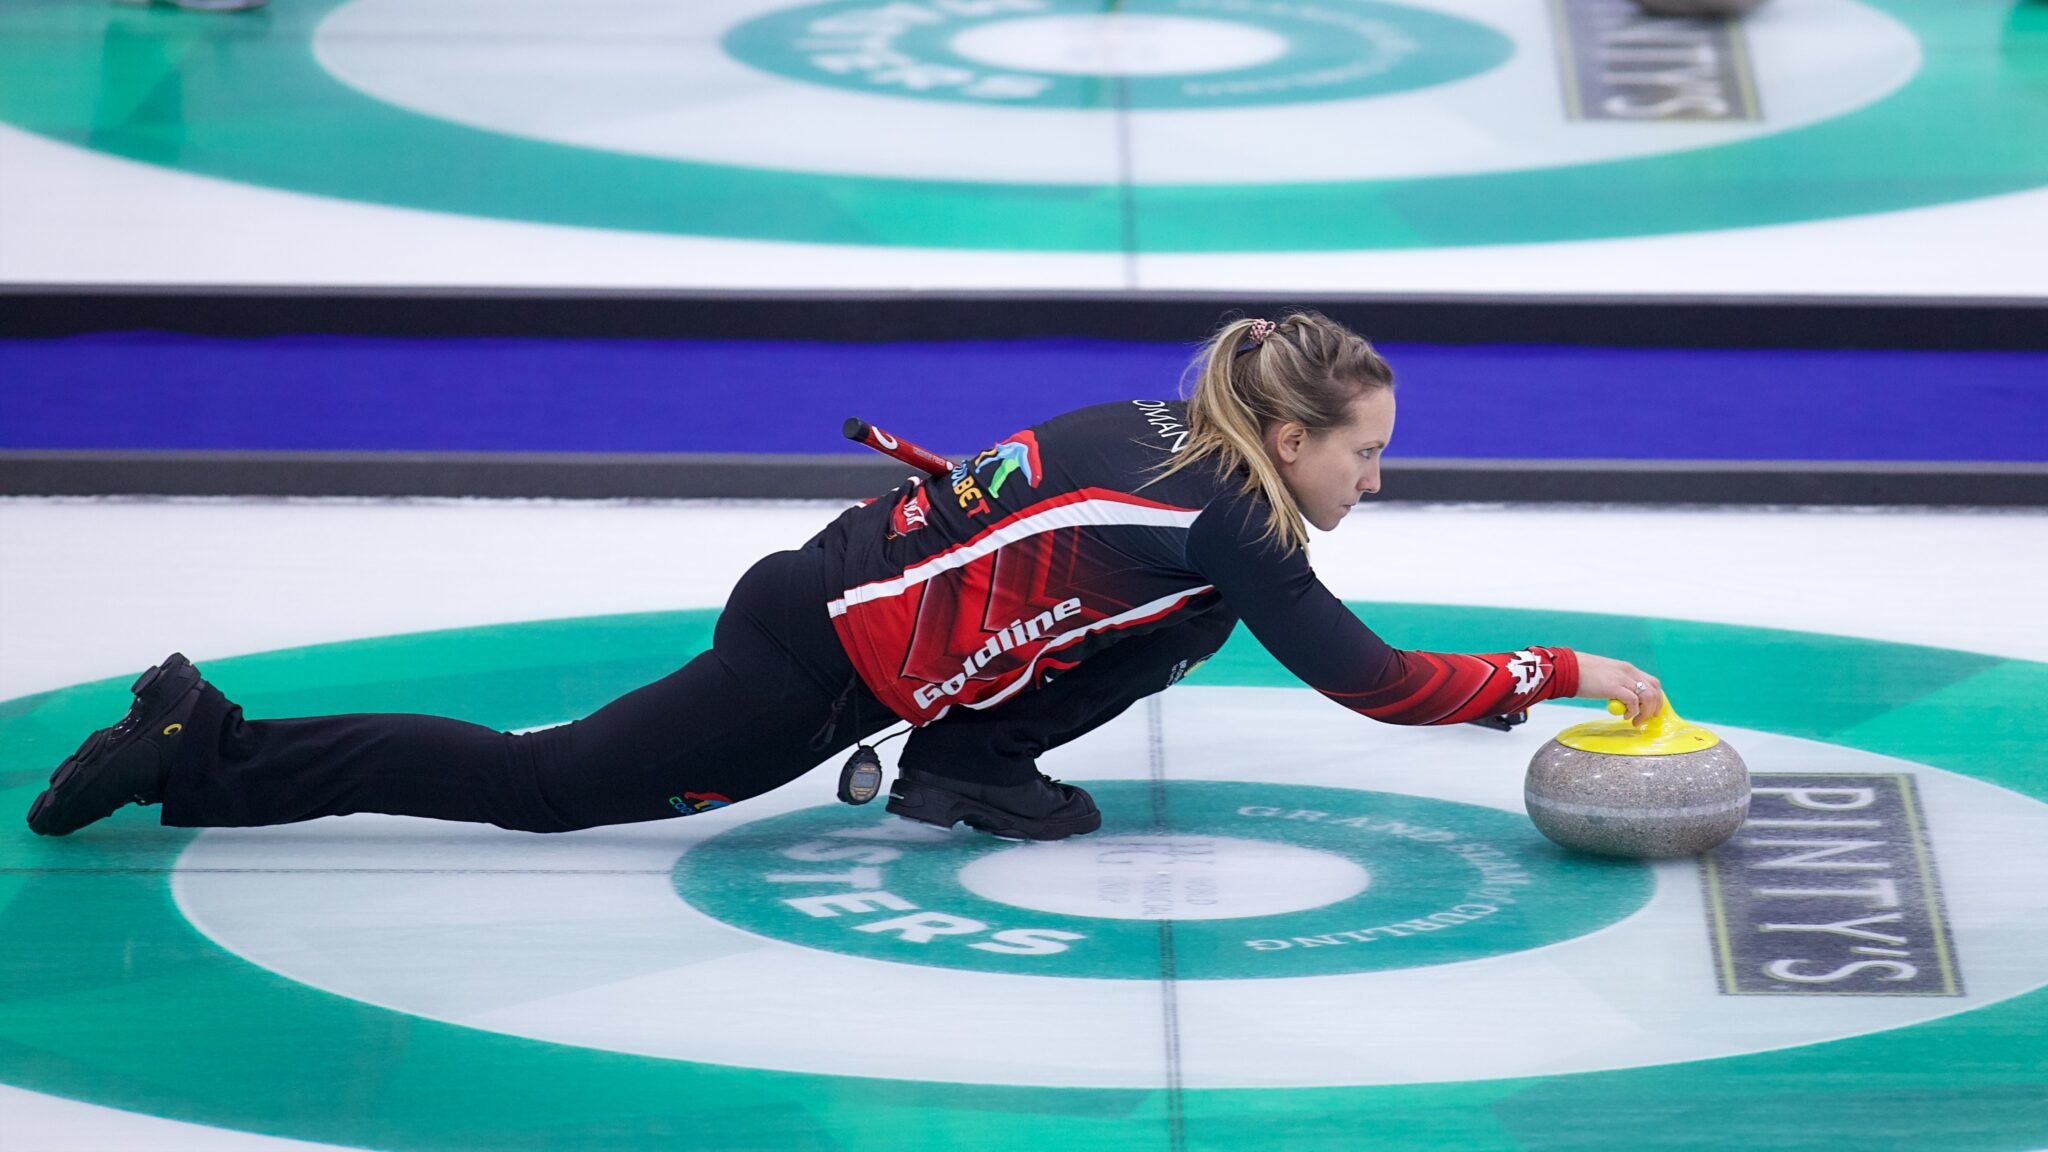 About the Grand Slam of Curling